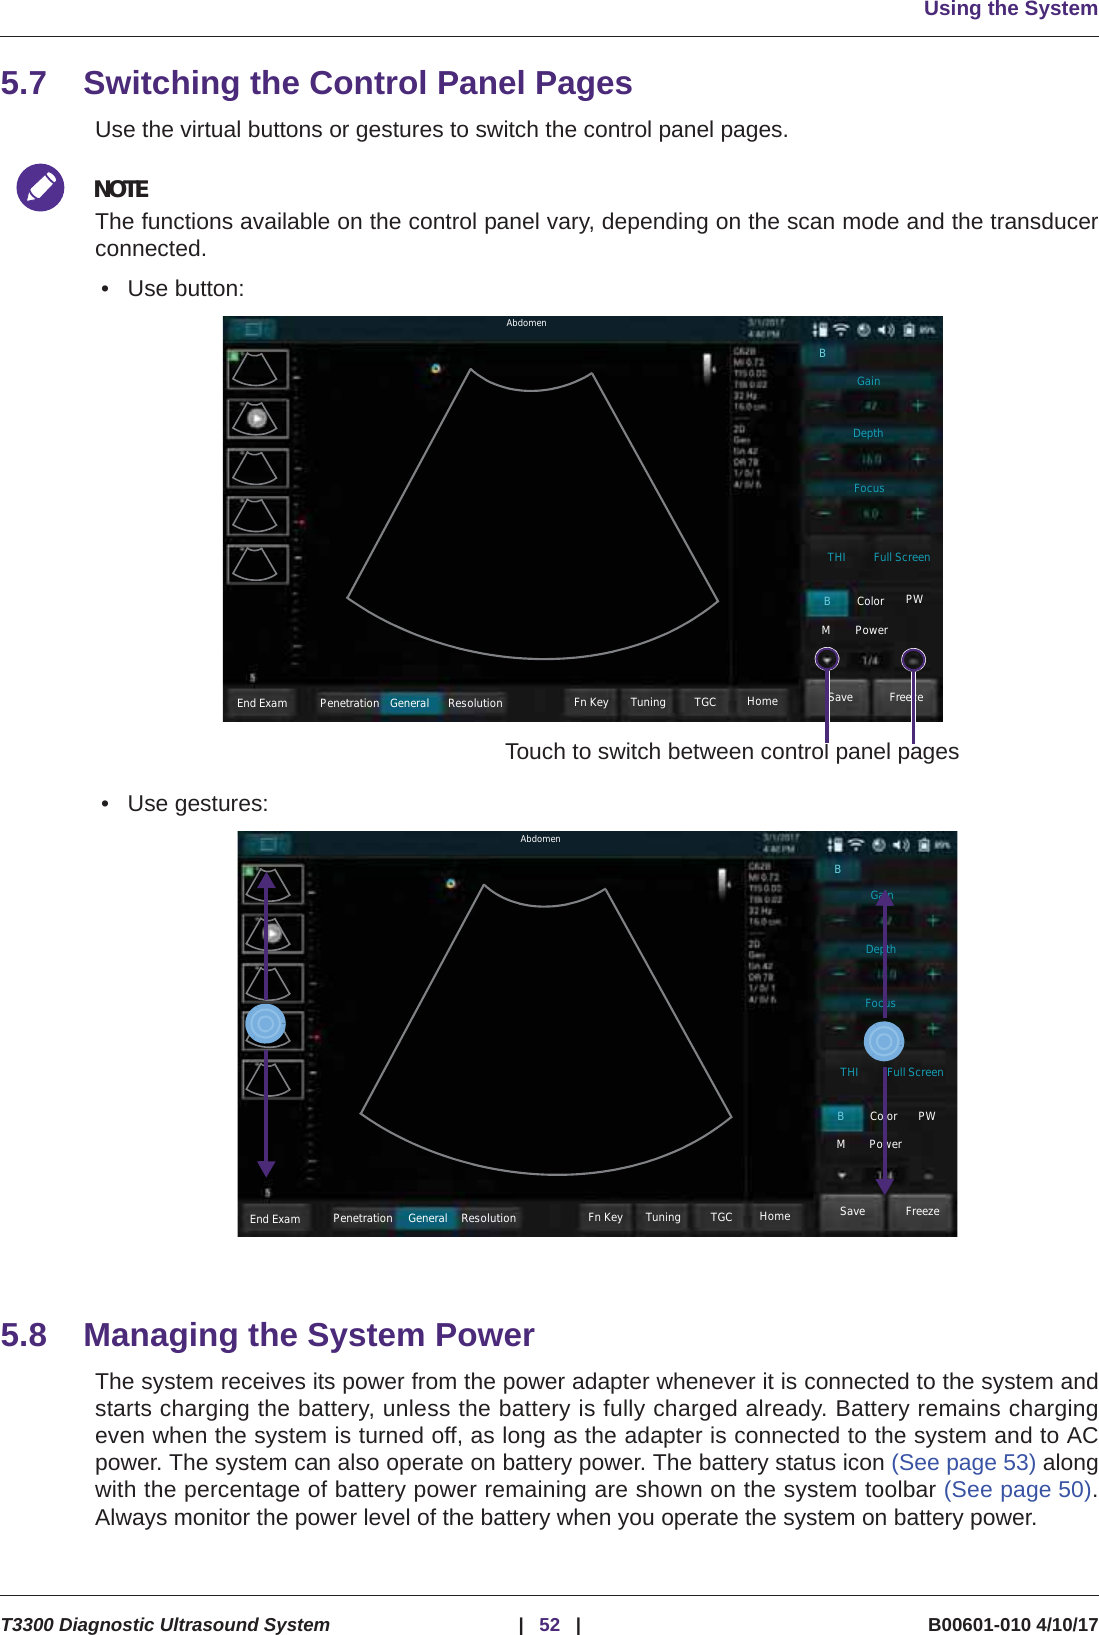 Using the SystemT3300 Diagnostic Ultrasound System |52 | B00601-010 4/10/175.7 Switching the Control Panel PagesUse the virtual buttons or gestures to switch the control panel pages.NOTEThe functions available on the control panel vary, depending on the scan mode and the transducerconnected.• Use button:• Use gestures:5.8 Managing the System PowerThe system receives its power from the power adapter whenever it is connected to the system andstarts charging the battery, unless the battery is fully charged already. Battery remains chargingeven when the system is turned off, as long as the adapter is connected to the system and to ACpower. The system can also operate on battery power. The battery status icon (See page 53) alongwith the percentage of battery power remaining are shown on the system toolbar (See page 50).Always monitor the power level of the battery when you operate the system on battery power.Touch to switch between control panel pagesAbdomenEnd Exam Penetration General Resolution FreezeSaveFn Key Tuning TGC HomeColor PWMPowerBTHI Full ScreenFocusDepthGainBEnd Exam Penetration General Resolution FreezeSaveFn Key Tuning TGC HomeColor PWMPowerBTHI Full ScreenFocusDepthGainBAbdomen